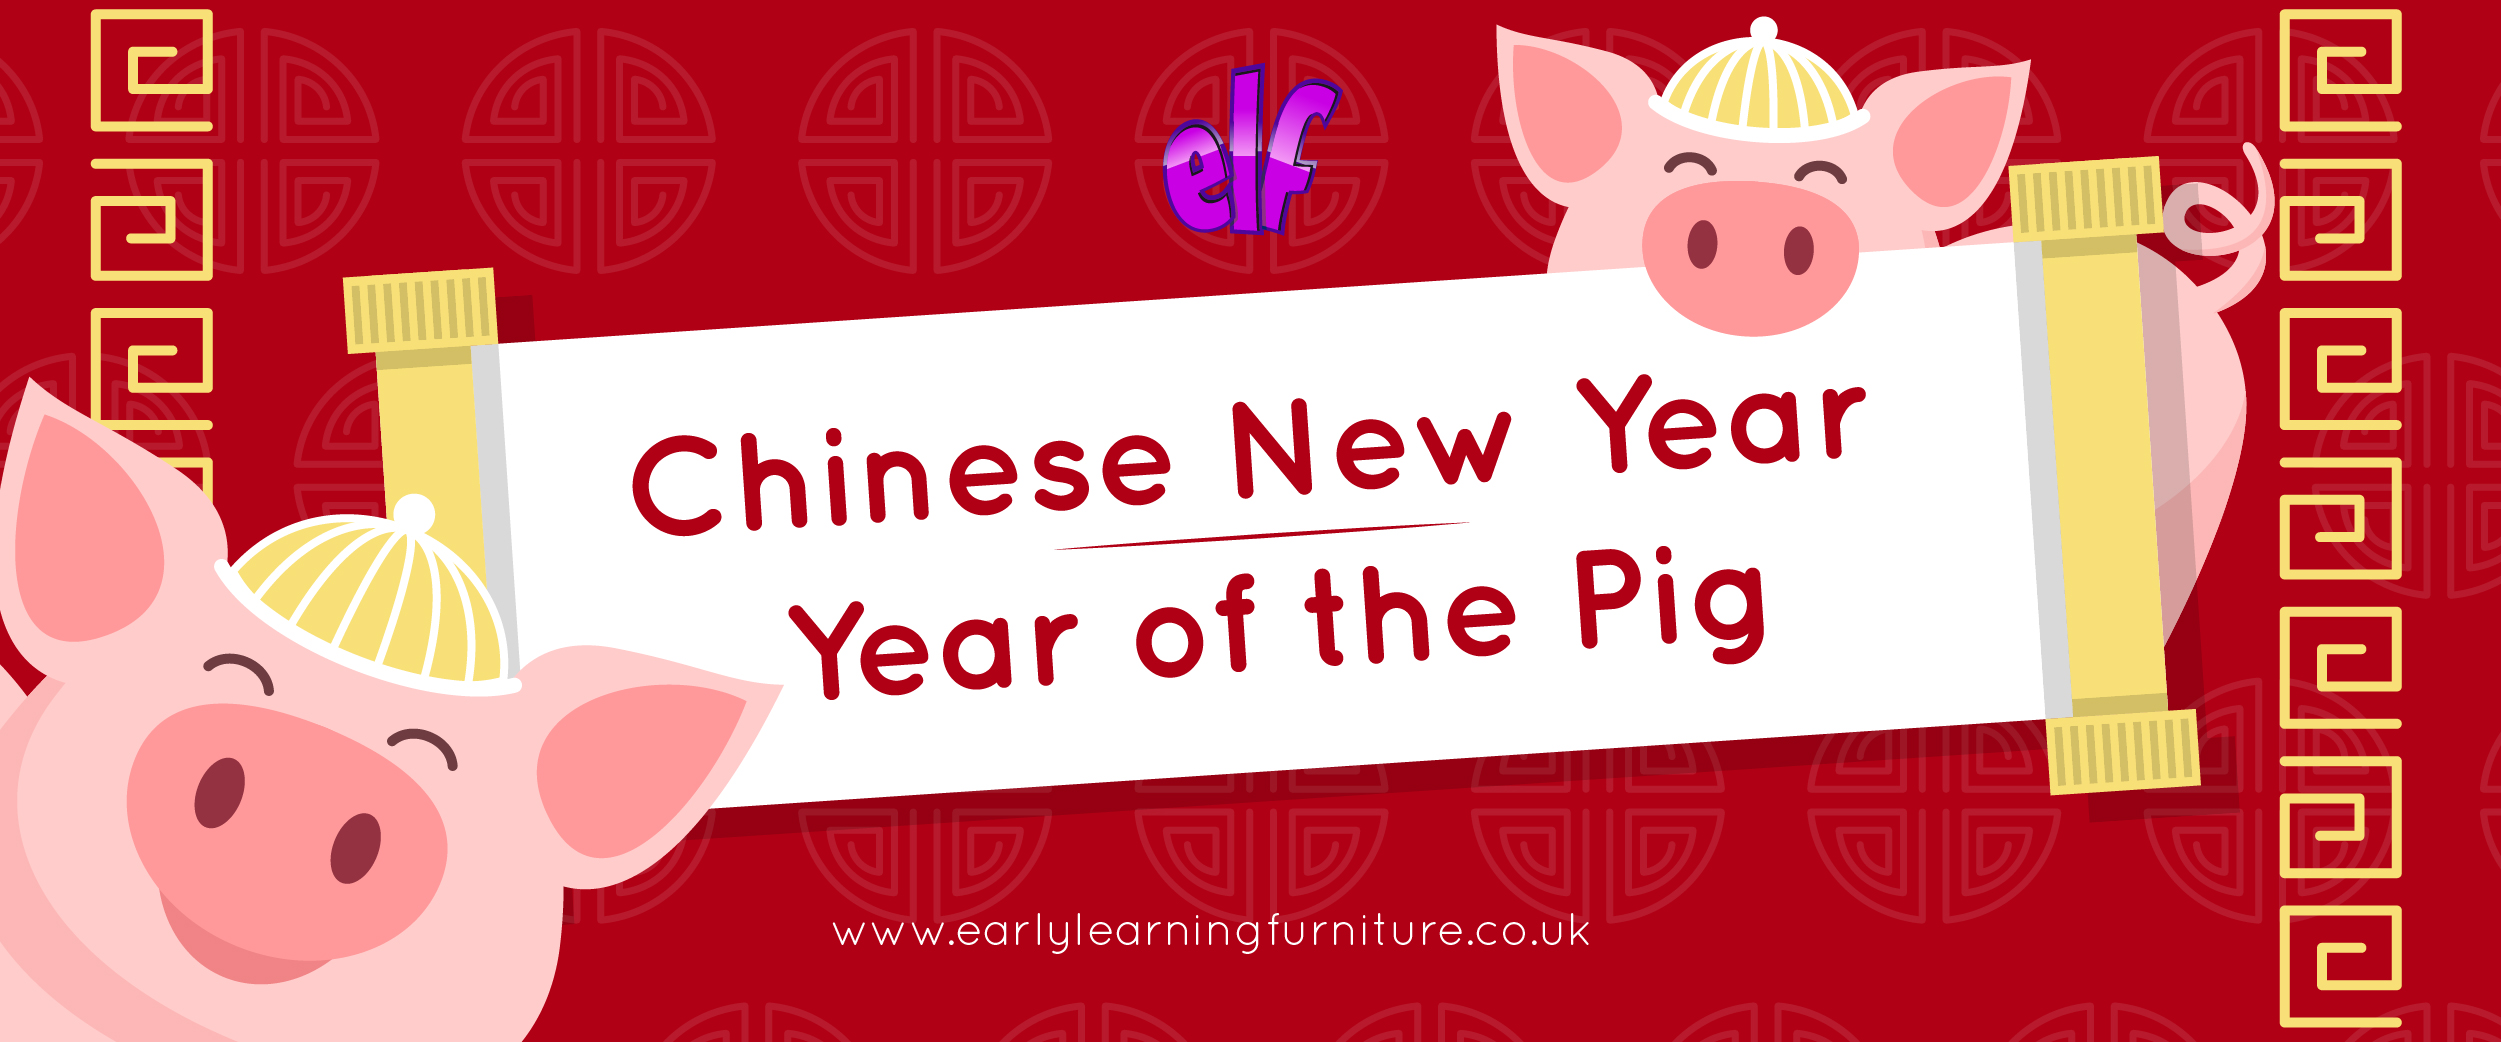 Chinese New Year - Year of the Pig